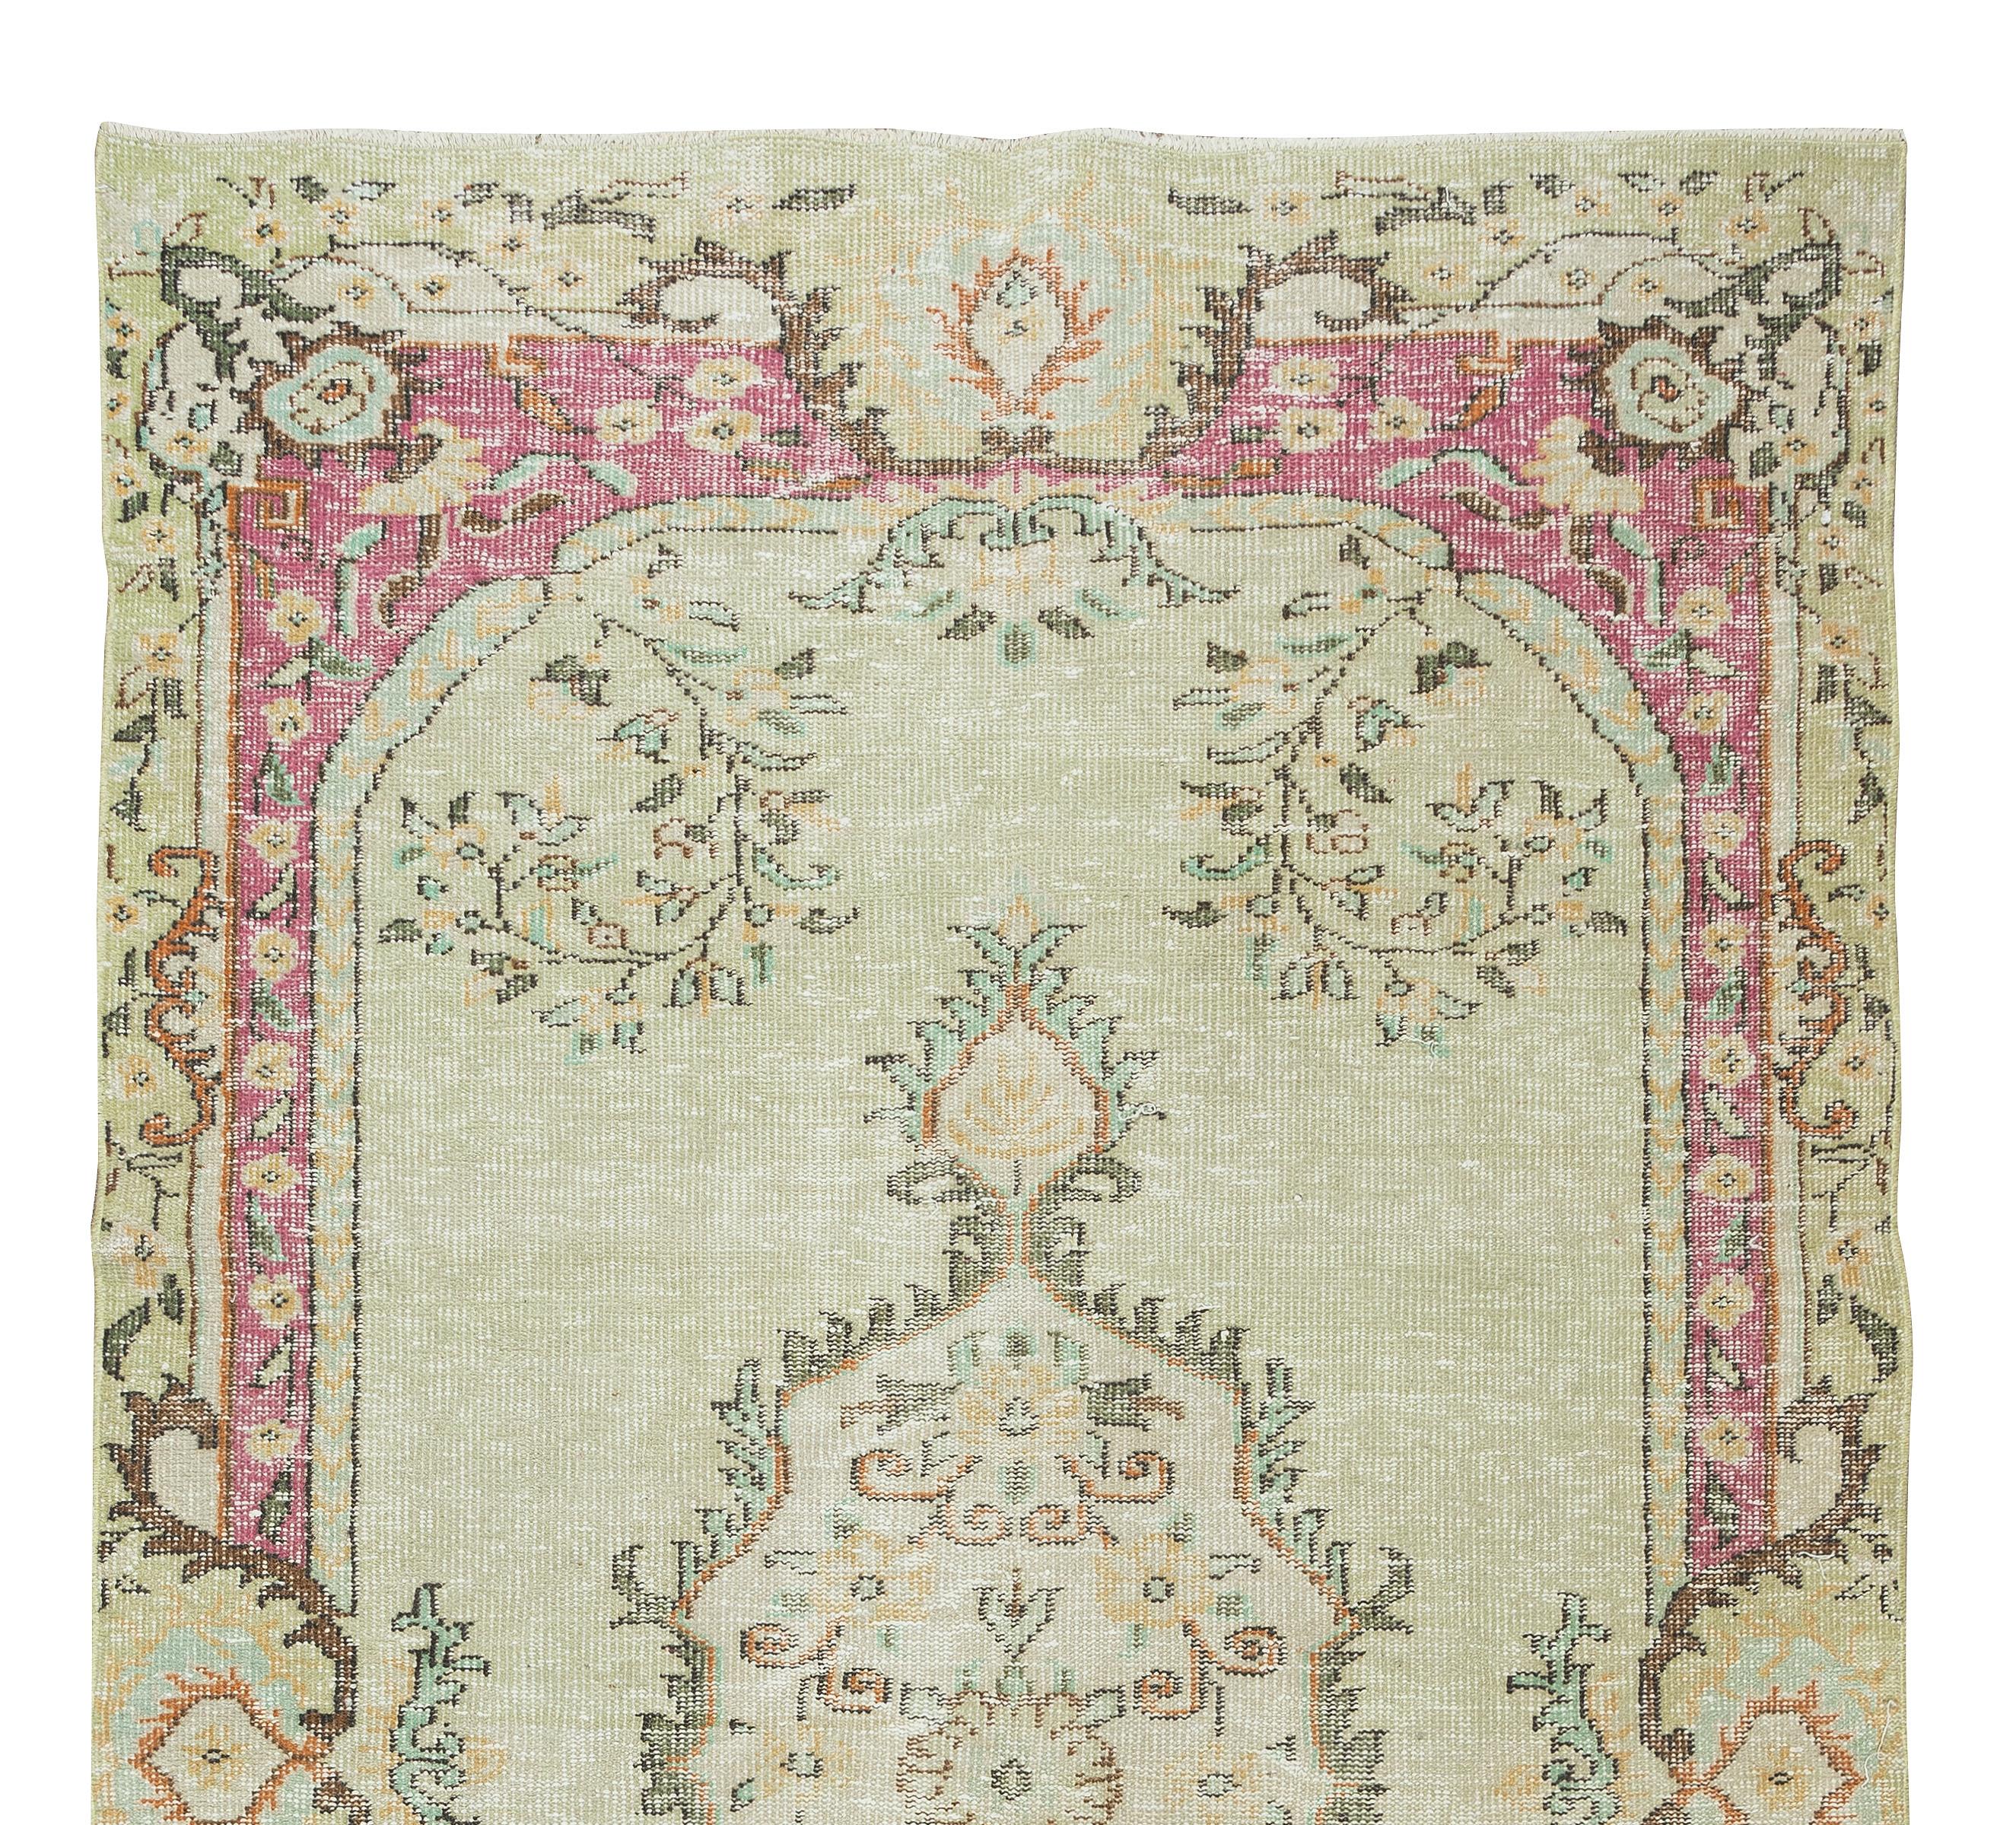 Hand-Knotted 5.2x9.7 Ft Turkish Vintage Wool Area Rug, Light Green & Pink Handmade Carpet For Sale